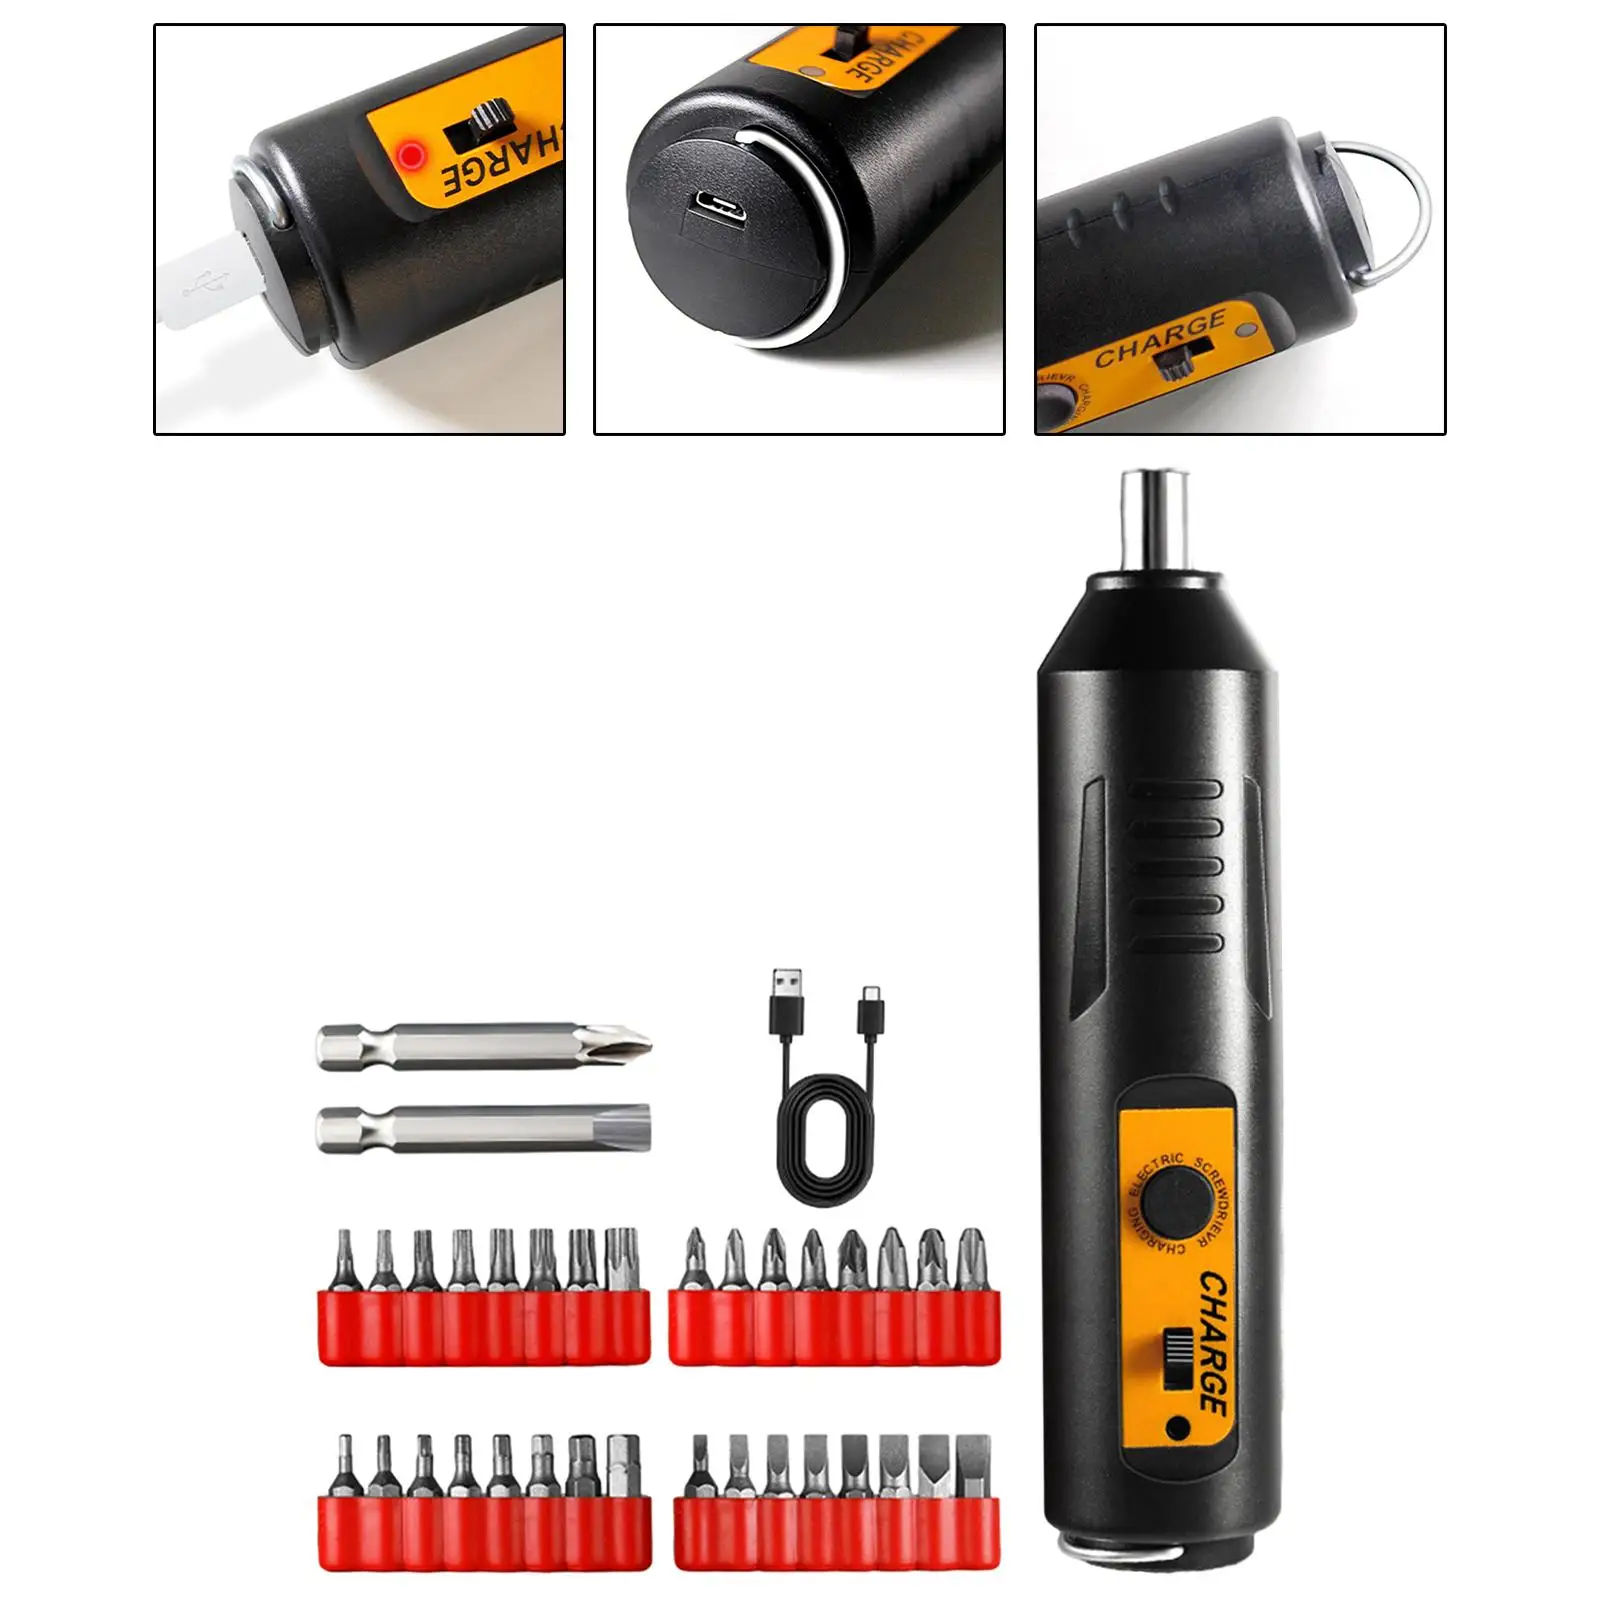 

Cordless Electric Screwdriver Fasteners Ergonomic Handle Screwdriving Set for Maintain Furniture Assembly Cabinet Installation